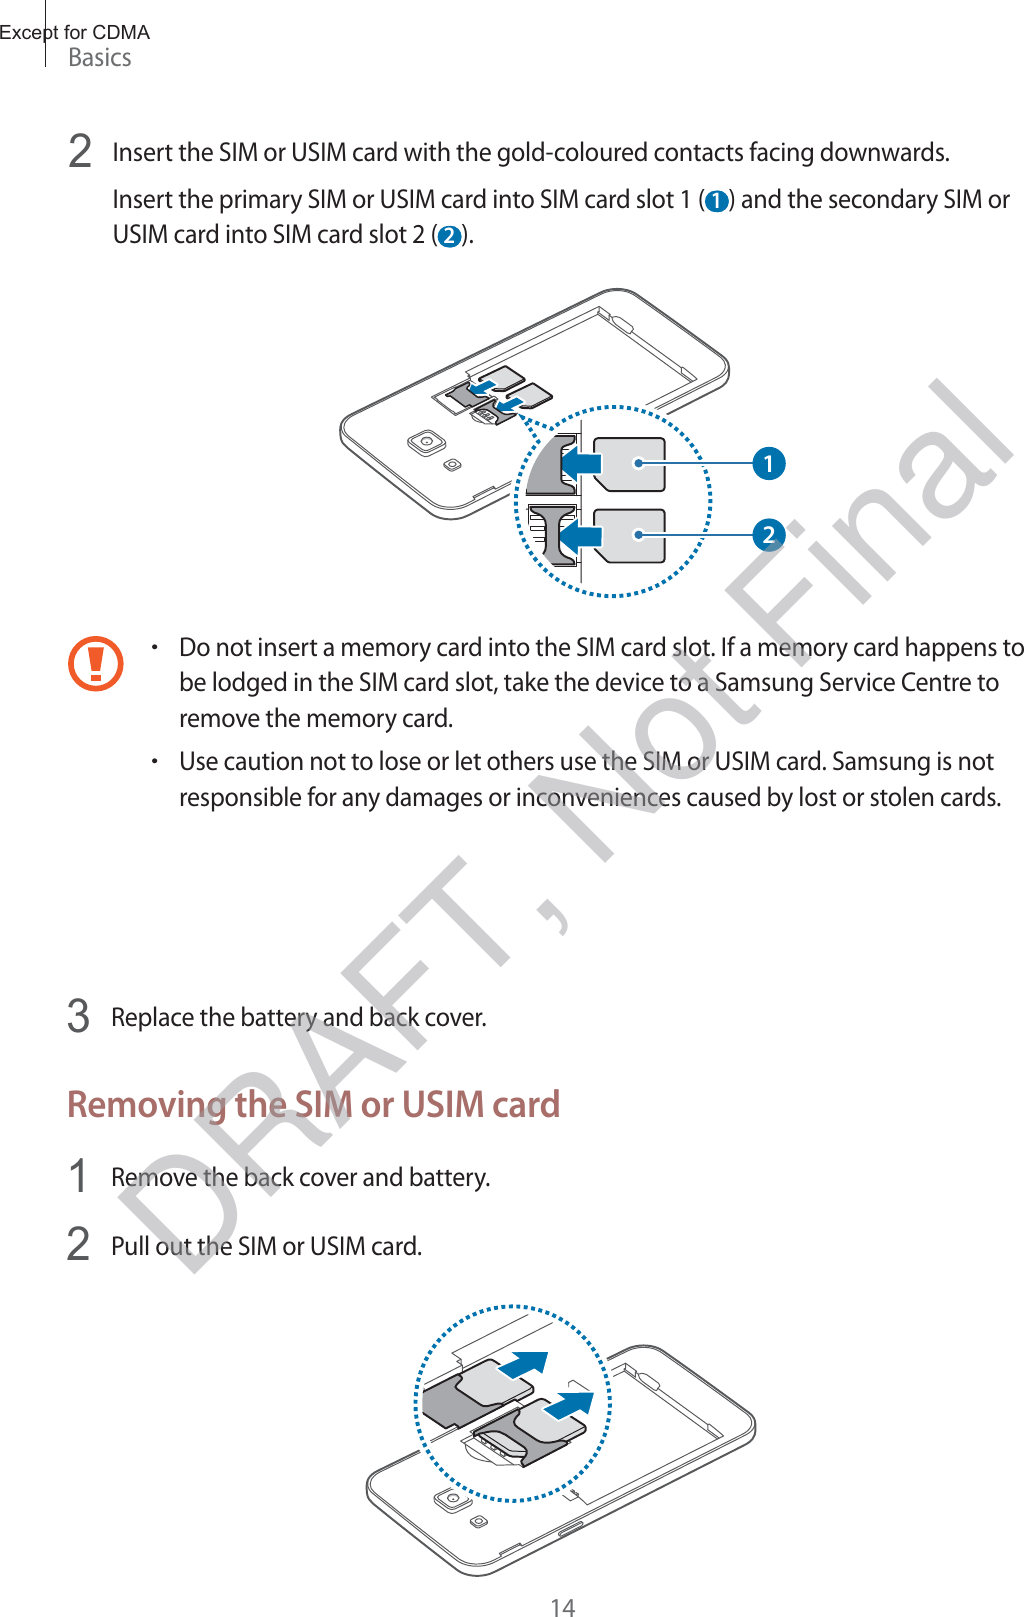 Basics142 Insert the SIM or USIM card with the gold-coloured contacts facing downwards.Insert the primary SIM or USIM card into SIM card slot 1 ( 1 ) and the secondary SIM or USIM card into SIM card slot 2 ( 2 ).12rDo not insert a memory card into the SIM card slot. If a memory card happens to be lodged in the SIM card slot, take the device to a Samsung Service Centre to remove the memory card.rUse caution not to lose or let others use the SIM or USIM card. Samsung is not responsible for any damages or inconveniences caused by lost or stolen cards.3 Replace the battery and back cover.Removing the SIM or USIM card1 Remove the back cover and battery.2 Pull out the SIM or USIM card.Except for CDMADRAFT, Not Final